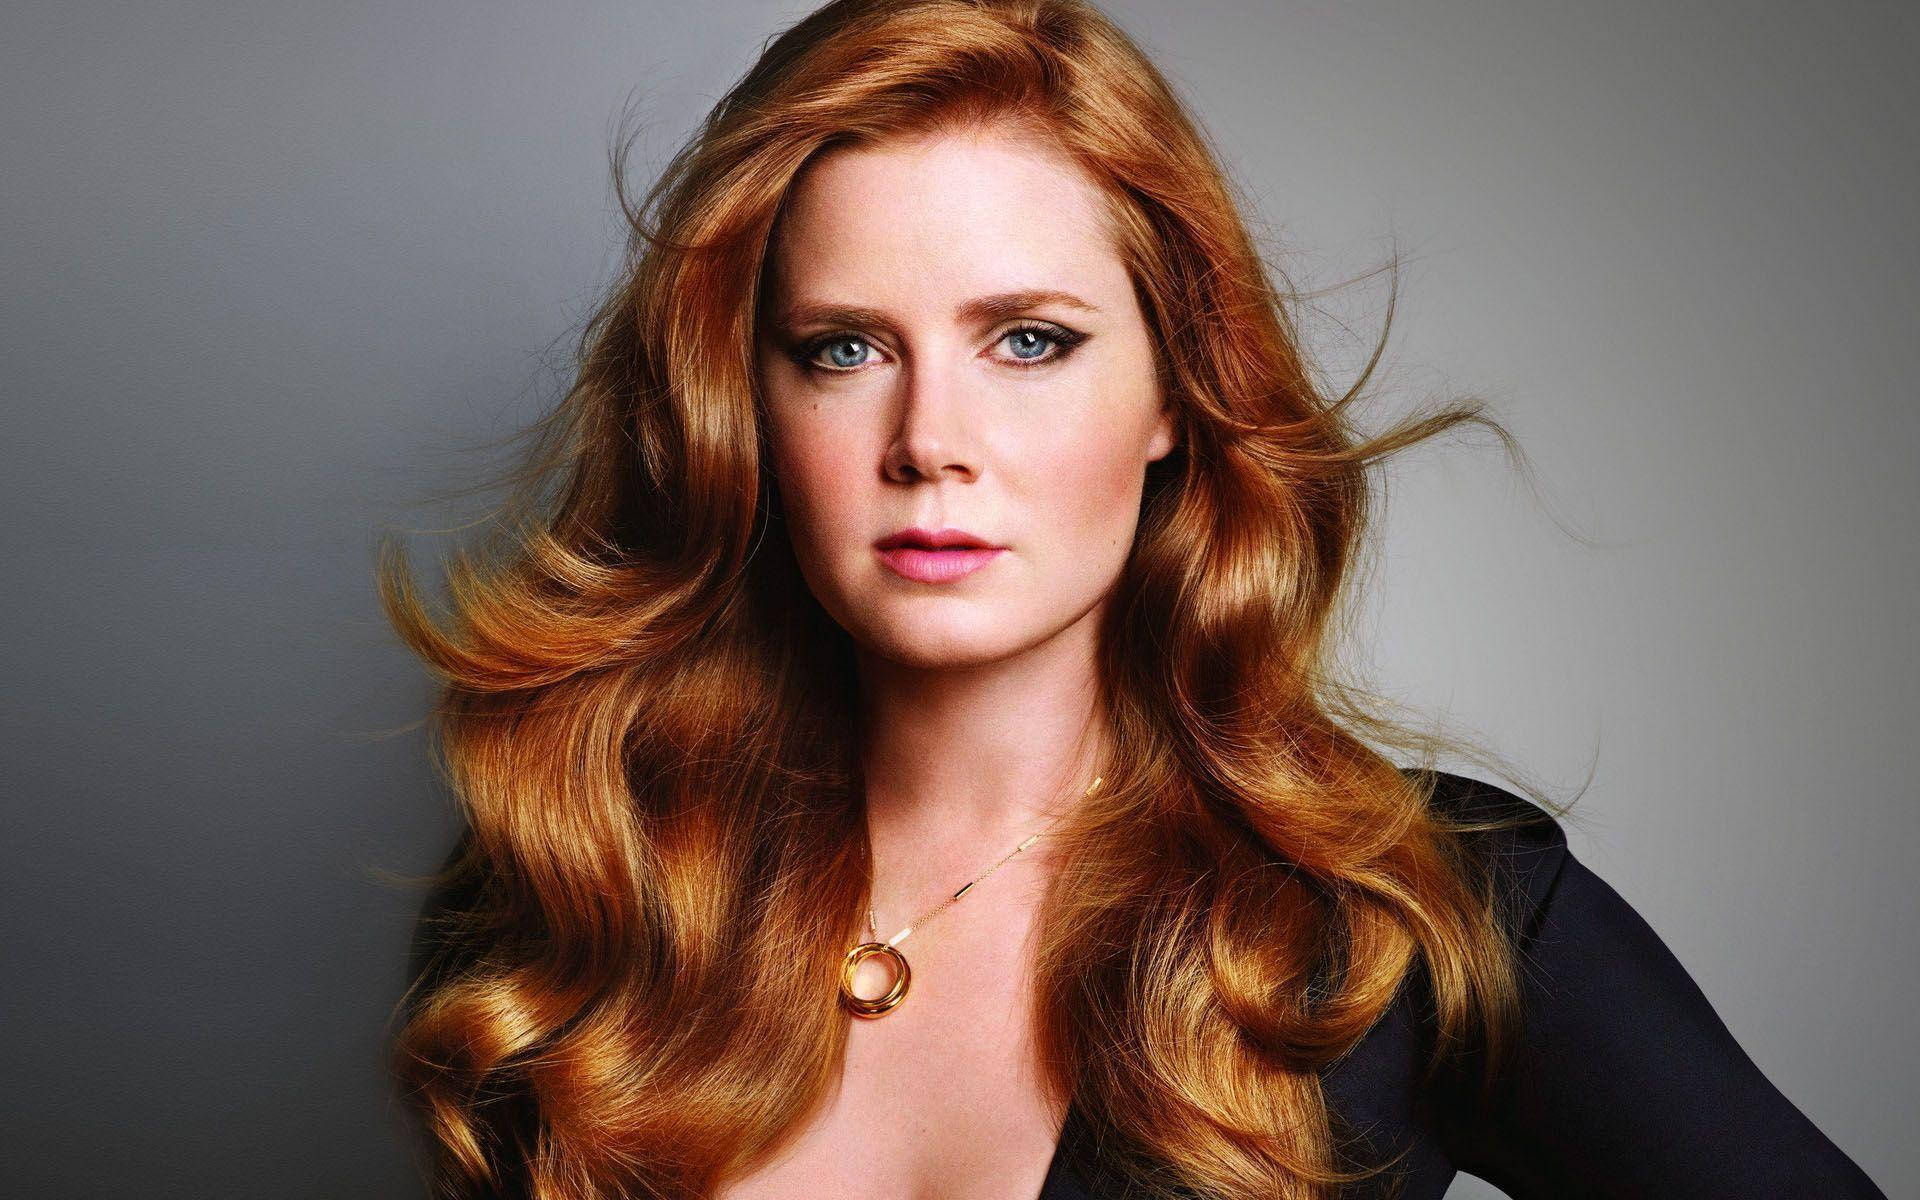 Free Amy Adams Wallpaper Downloads, [100+] Amy Adams Wallpapers for FREE |  